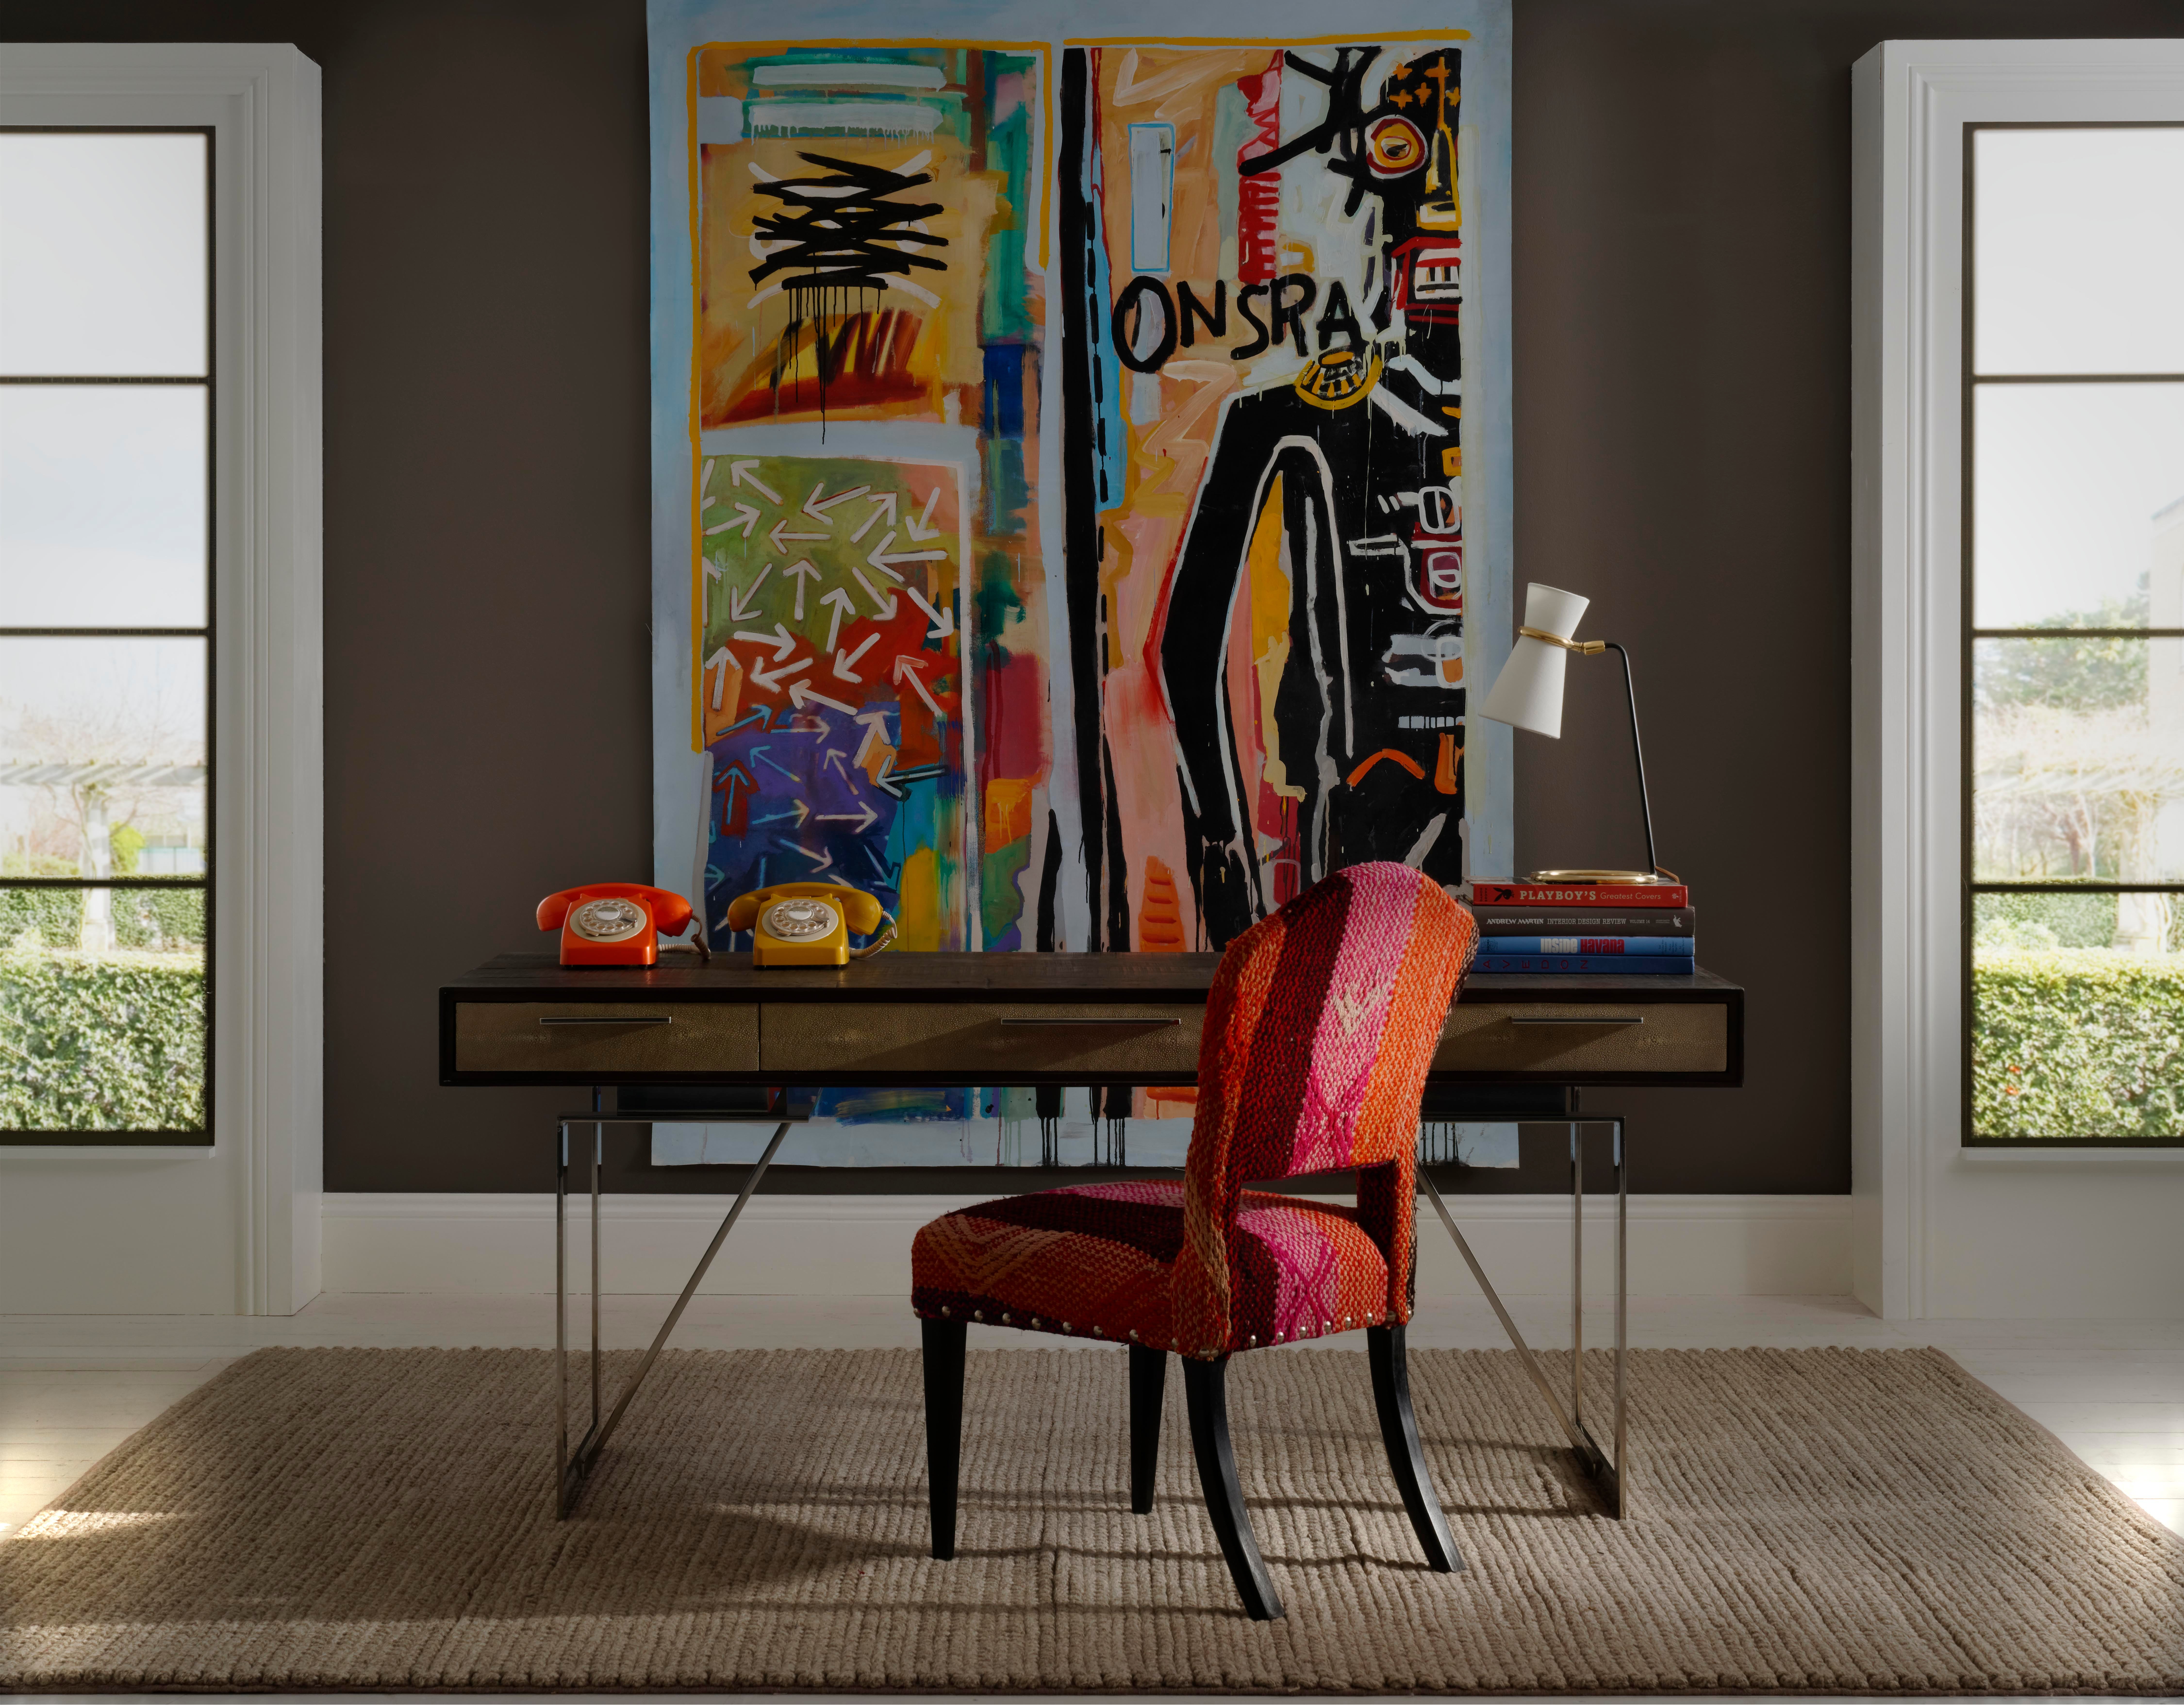 Wild Truffle Paint, from £51 for 2.5L, Latham Desk, £2,495, Clarkson Desk Lamp, £550, Bacall Jnr Chairs in Original Andean Textiles, £POR, Andrew Martin, www.andrewmartin.co.uk